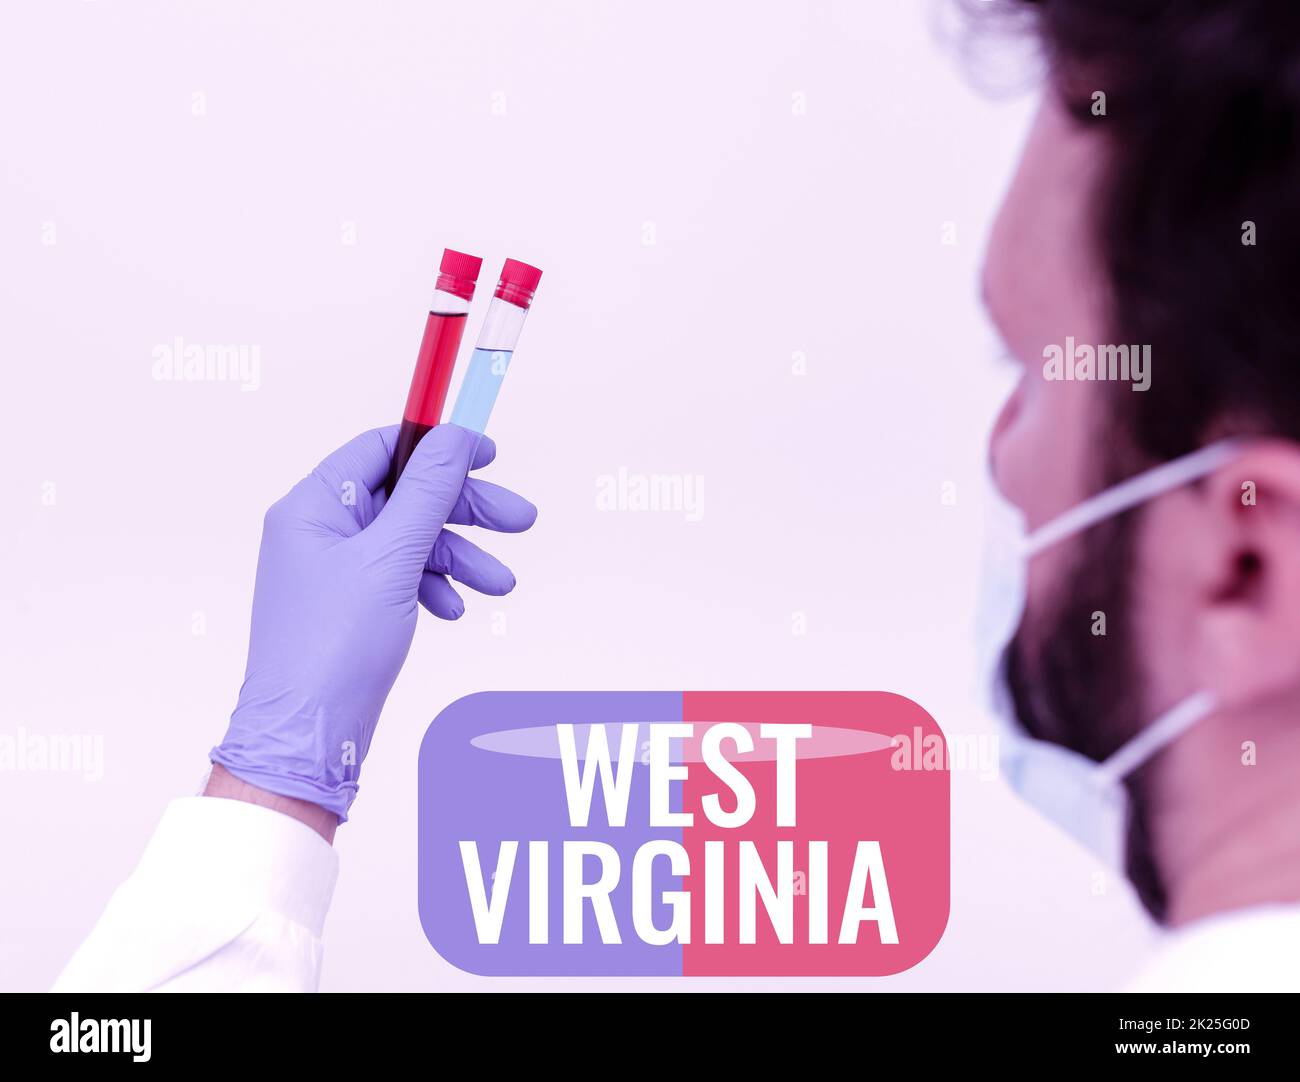 Text caption presenting West Virginia. Business approach United States of America State Travel Tourism Trip Historical Research Scientist Presenting New Medicine, Researching Preventive Measure Stock Photo